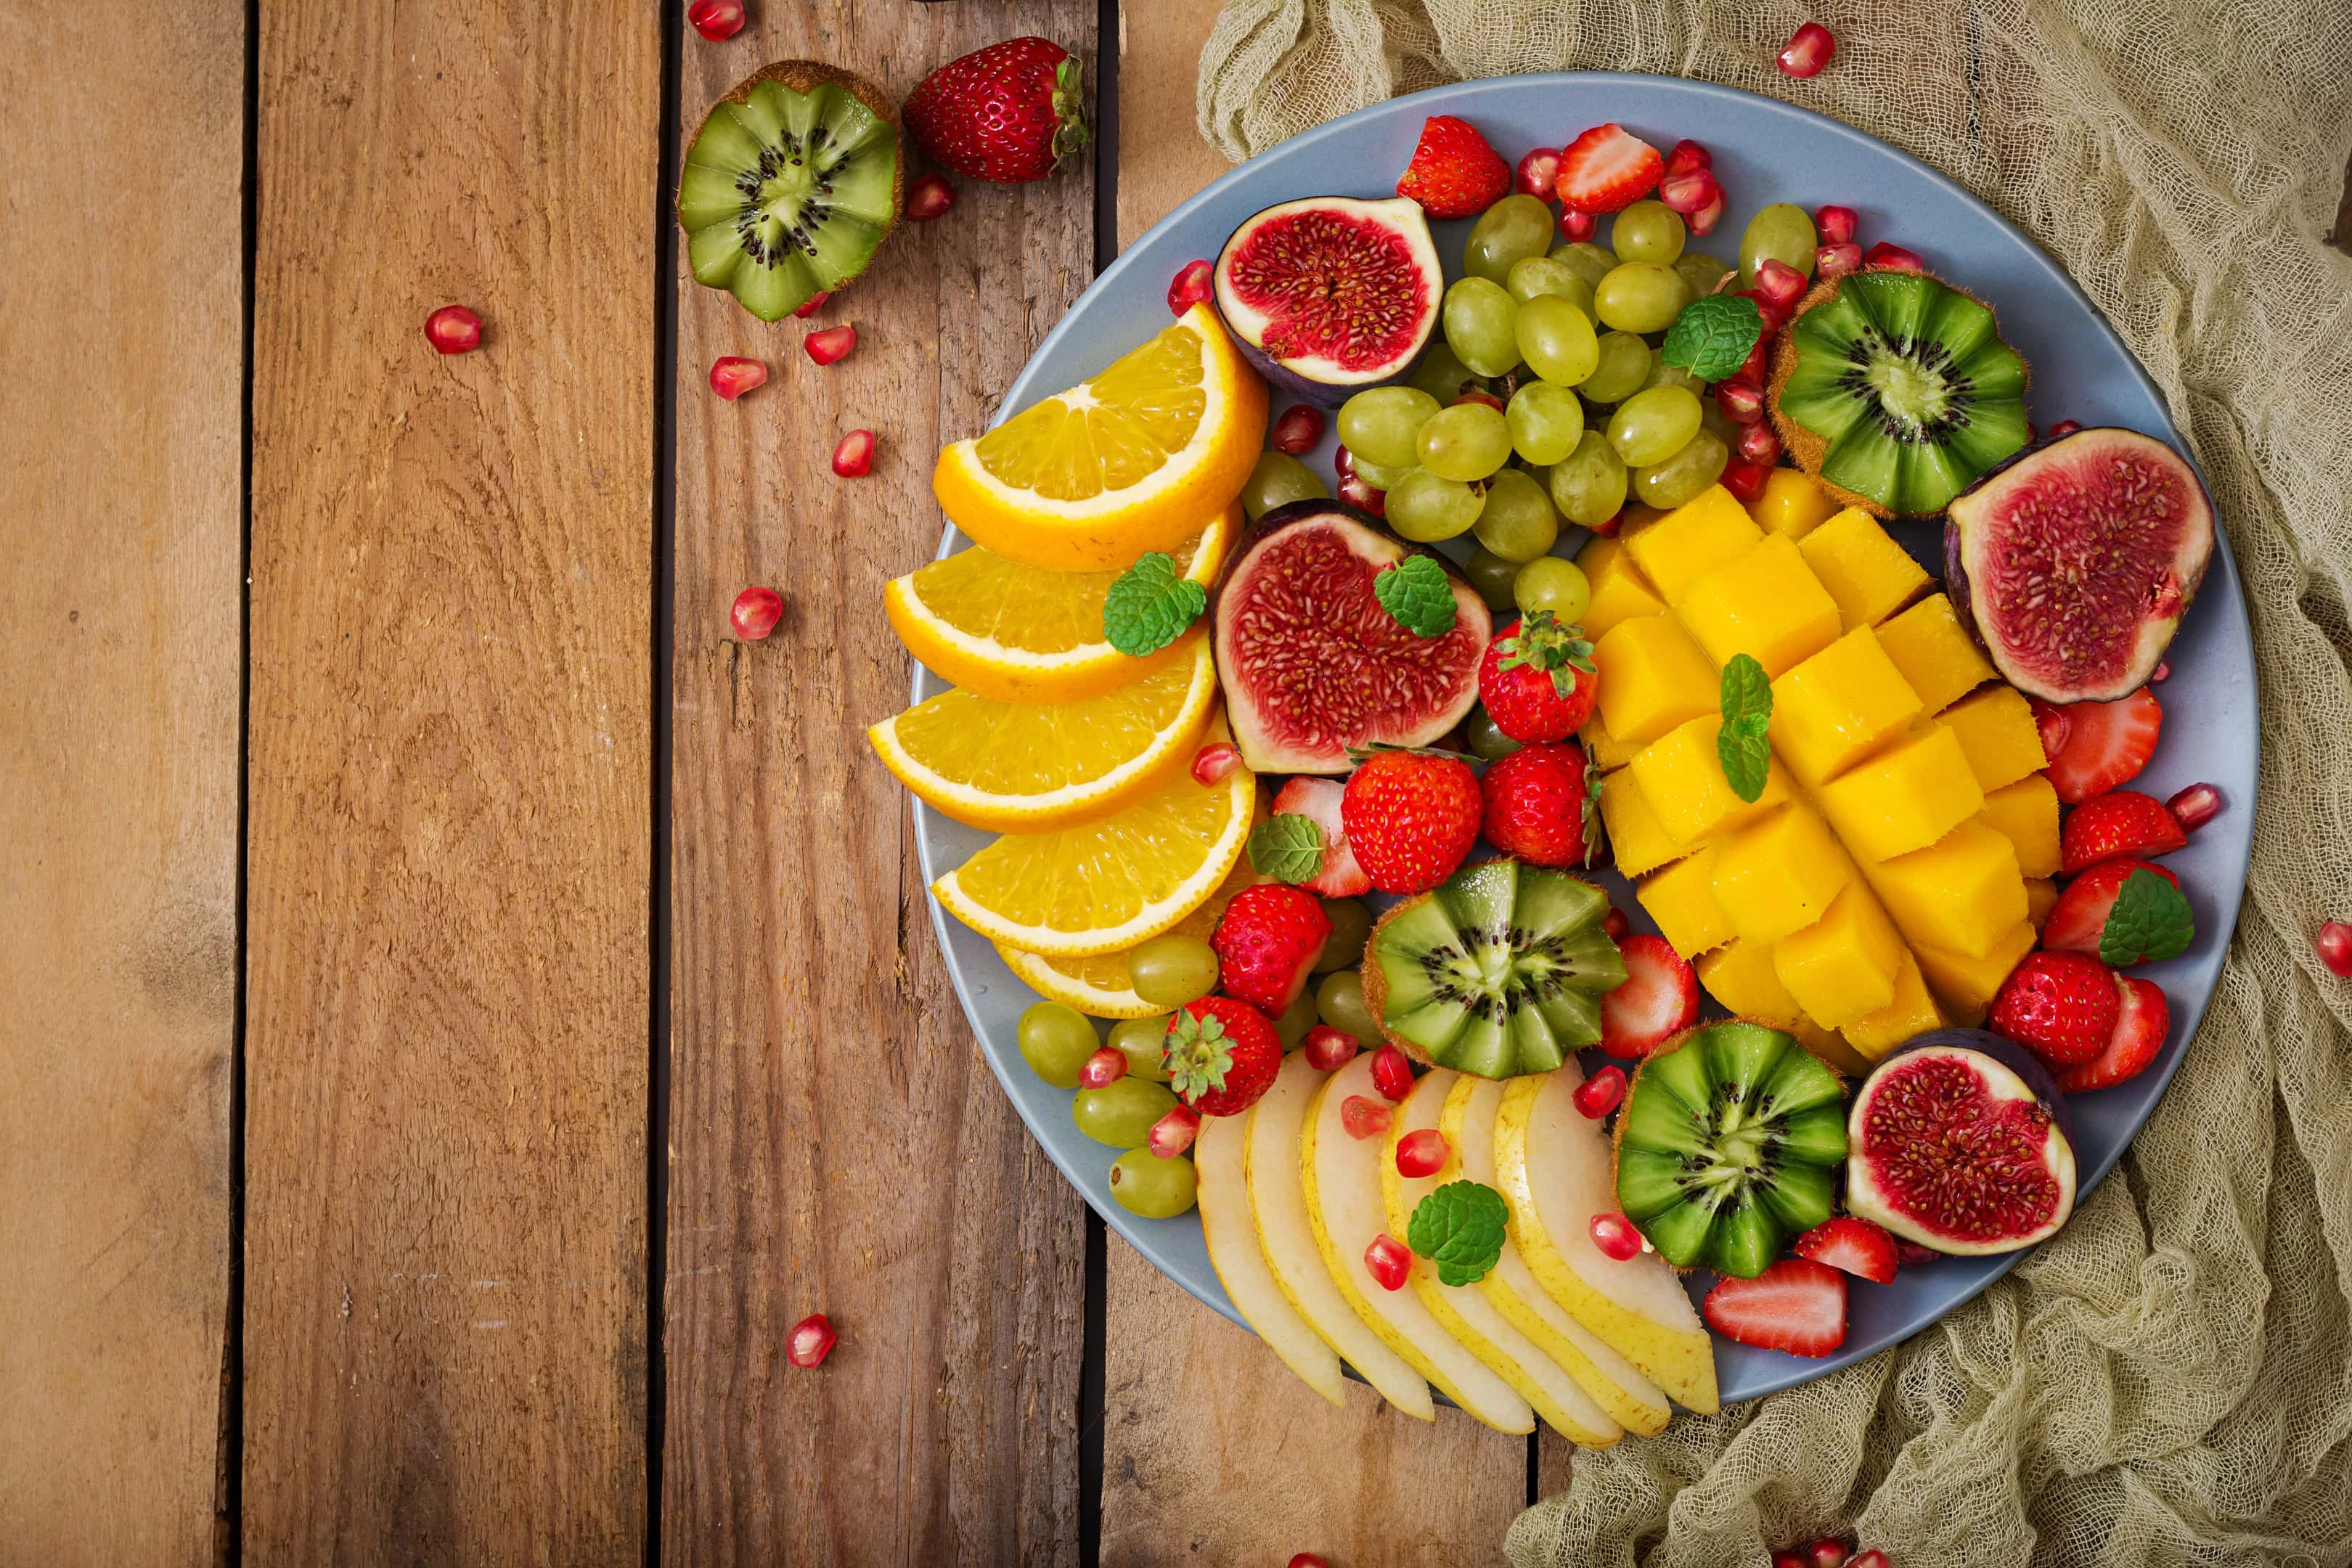 Platter of fruits and berries. Mango, kiwi, fig, strawberry, grapes, pear and orange.